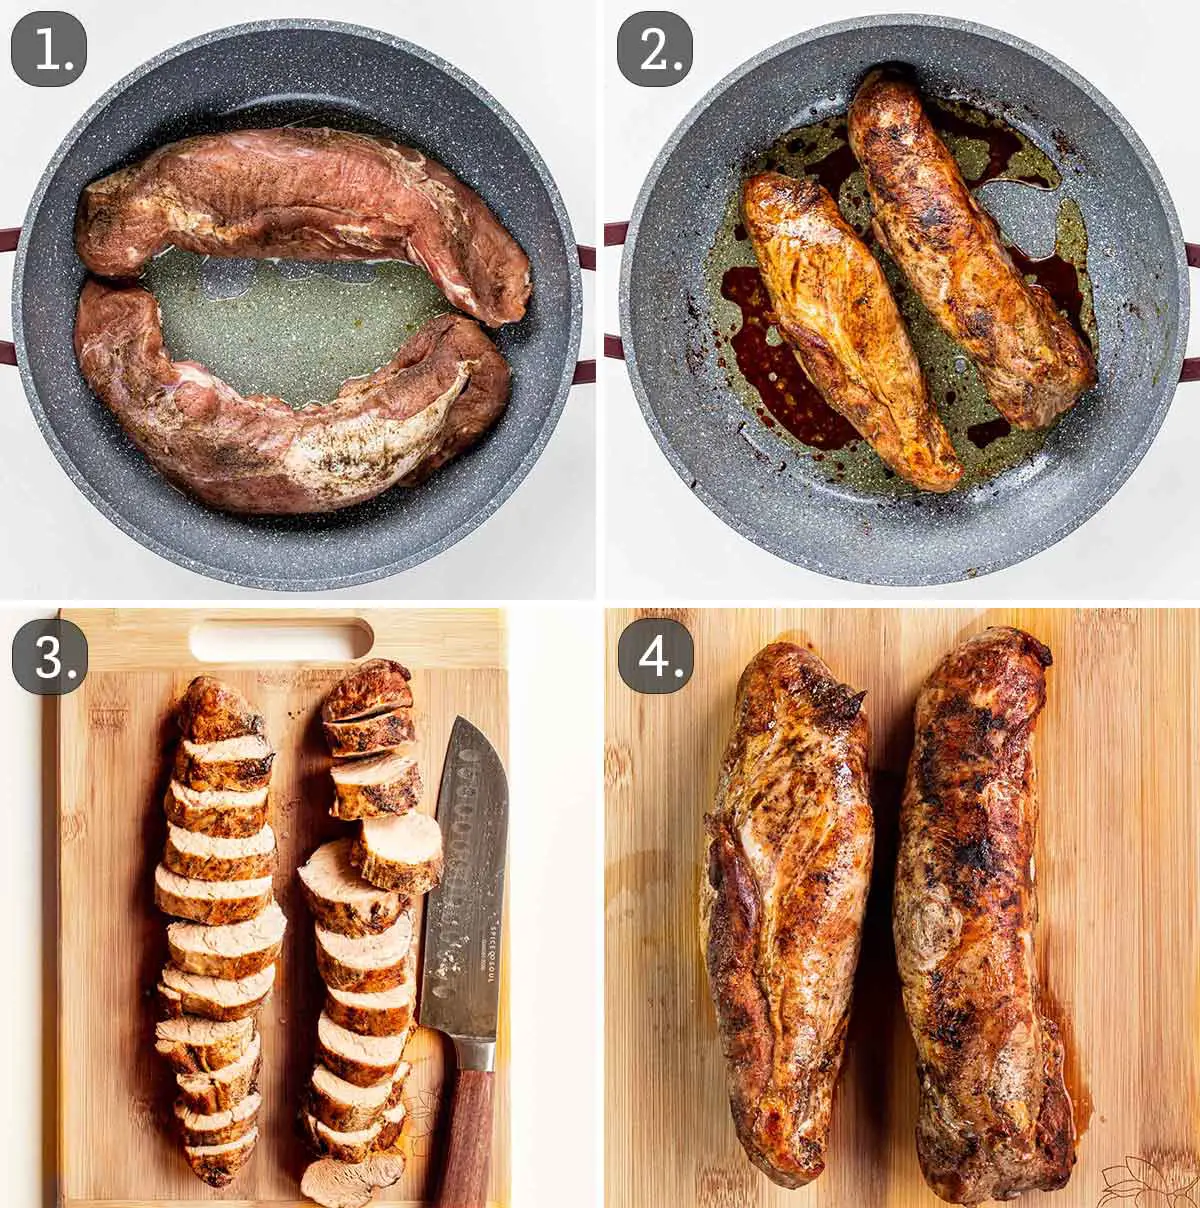 detailed process shots showing how to cook pork tenderloin perfectly.